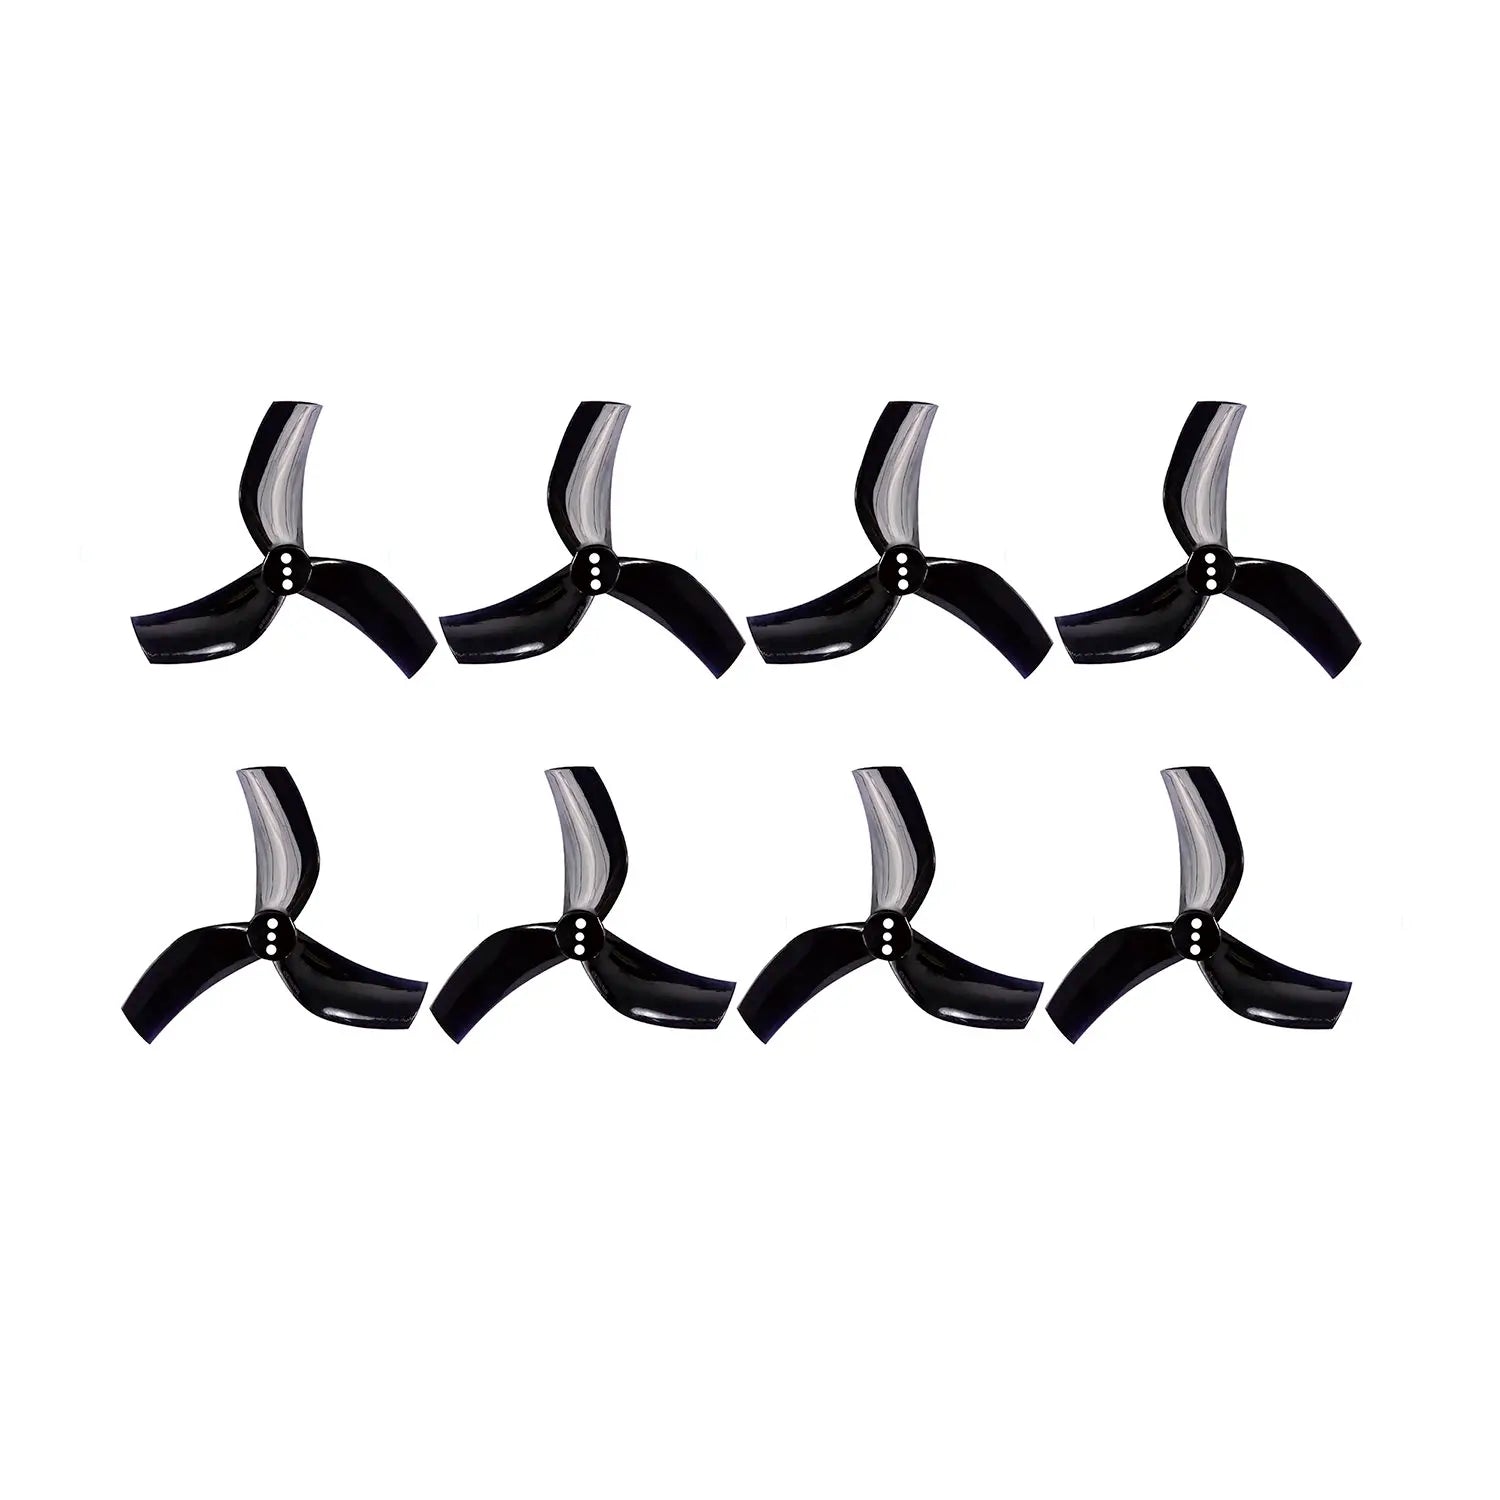 D63-3 2.5 inch CineWhoop Propeller, GEPRC Propellers are available in a variety of sizes and materials . they